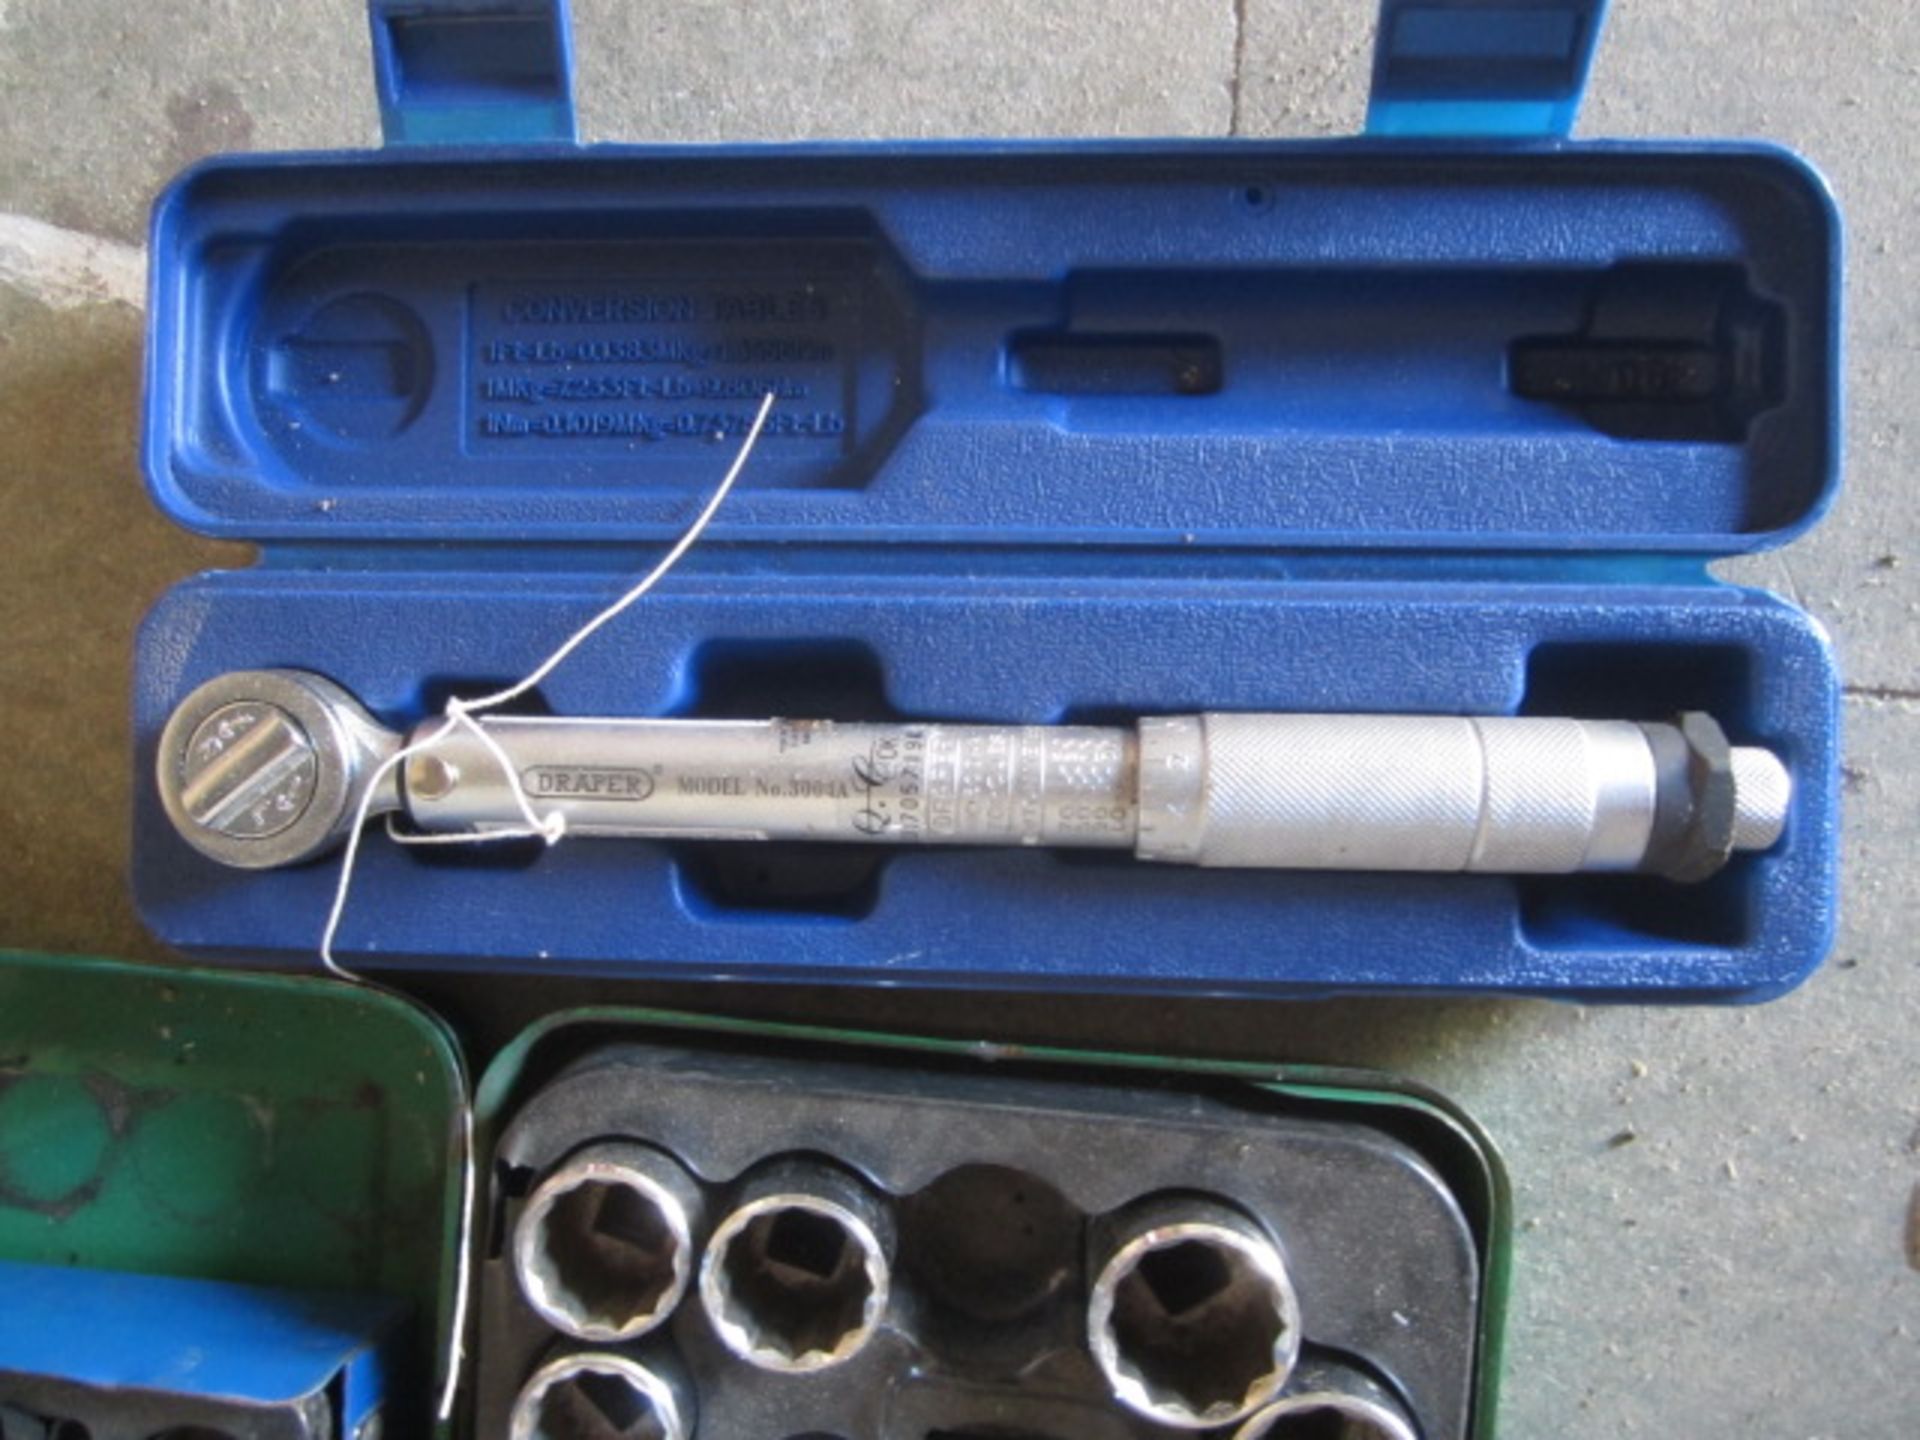 2 x part set socket sets, Draper micrometer torque wrench,Located at main school,** Located at - Image 3 of 3